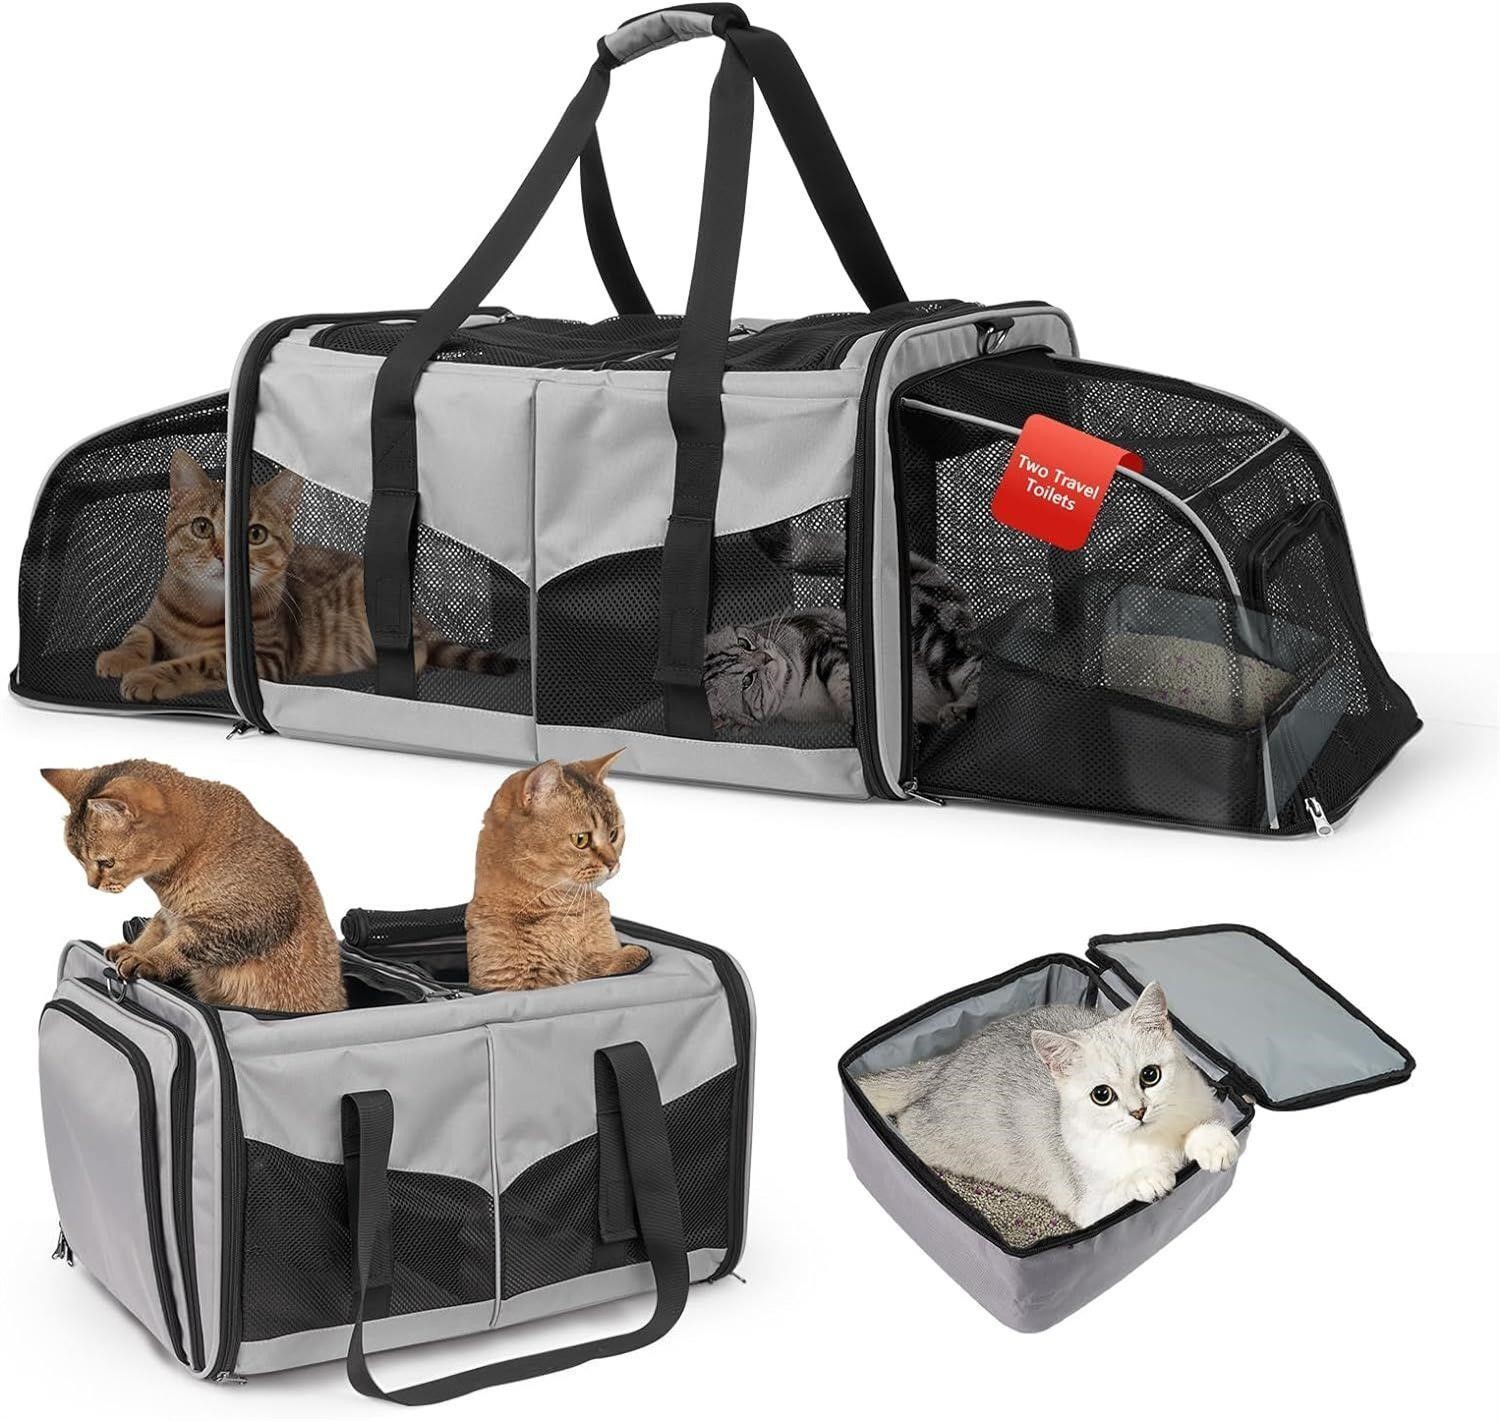 Cat Travel Carrier with Litter Boxes for 2 Cats